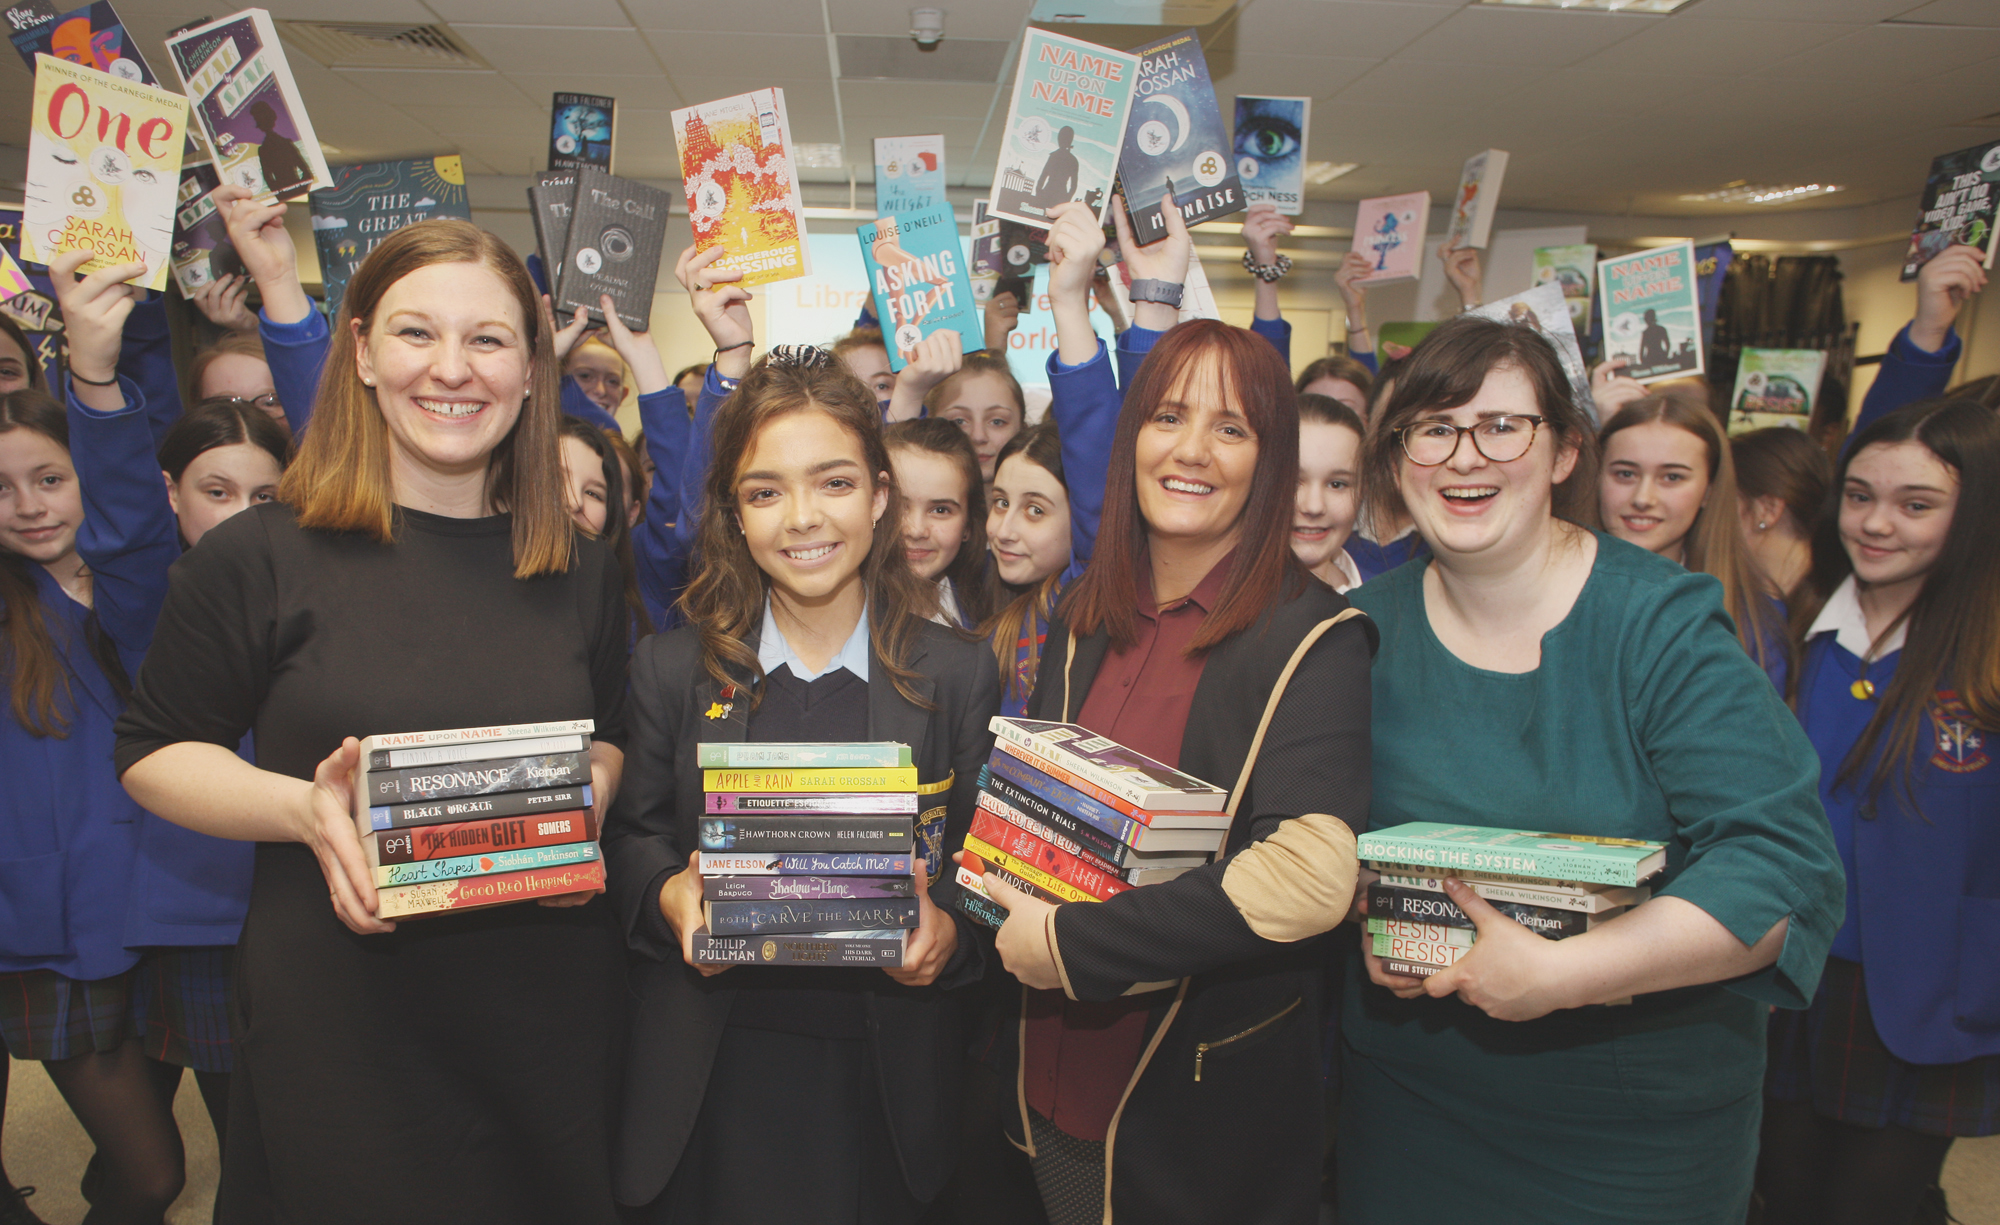 Children’s Books Ireland is proud to announce that St Genevieve\'s High School has been chosen to receive a library of literature worth almost €8,000. Welcoming the books are Daiden O\'Regan, Andrea Mervyn, Head Girl Ana Rosbotham, Elaina Ryan and St Gen\'s pupils 